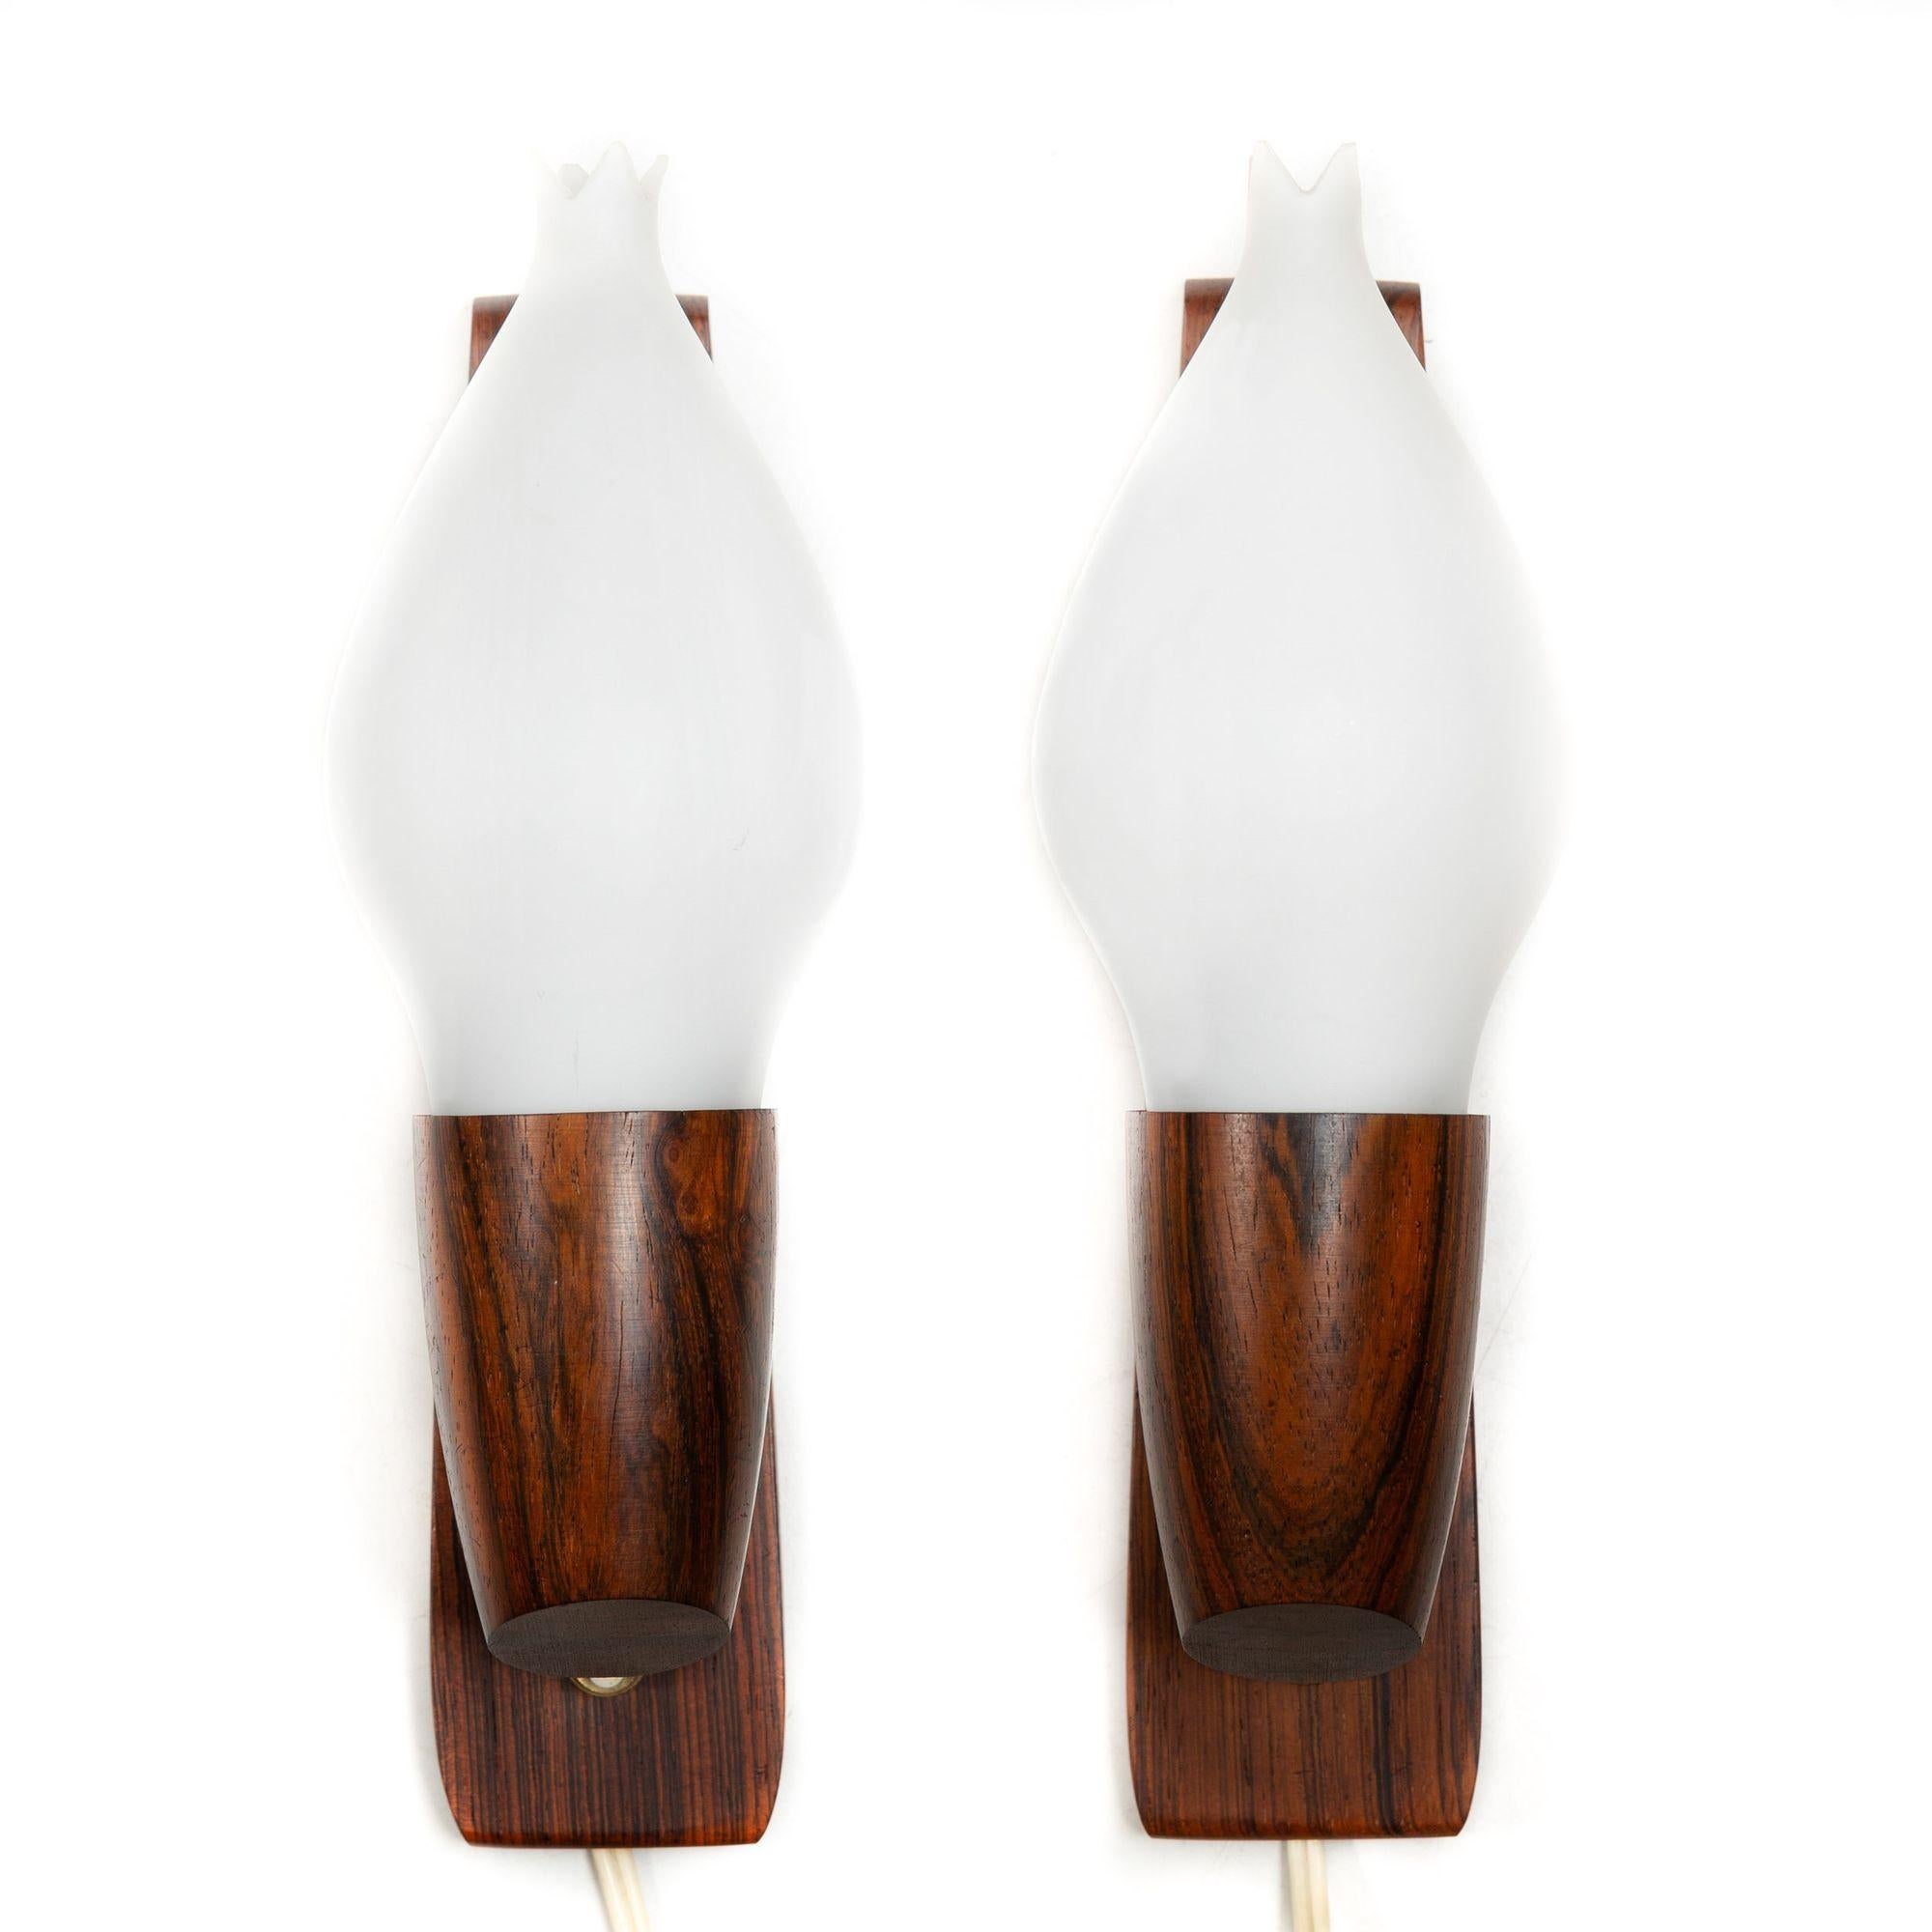 PAIR OF DANISH MODERN ROSEWOOD AND FROSTED-GLASS WALL SCONCES
Designed by Vitrika, Denmark circa 1970s
Item # 311VNK02P-2

A perfect representation of the elegance of Danish design, this sleek pair of sculpted rosewood wall sconces were designed by